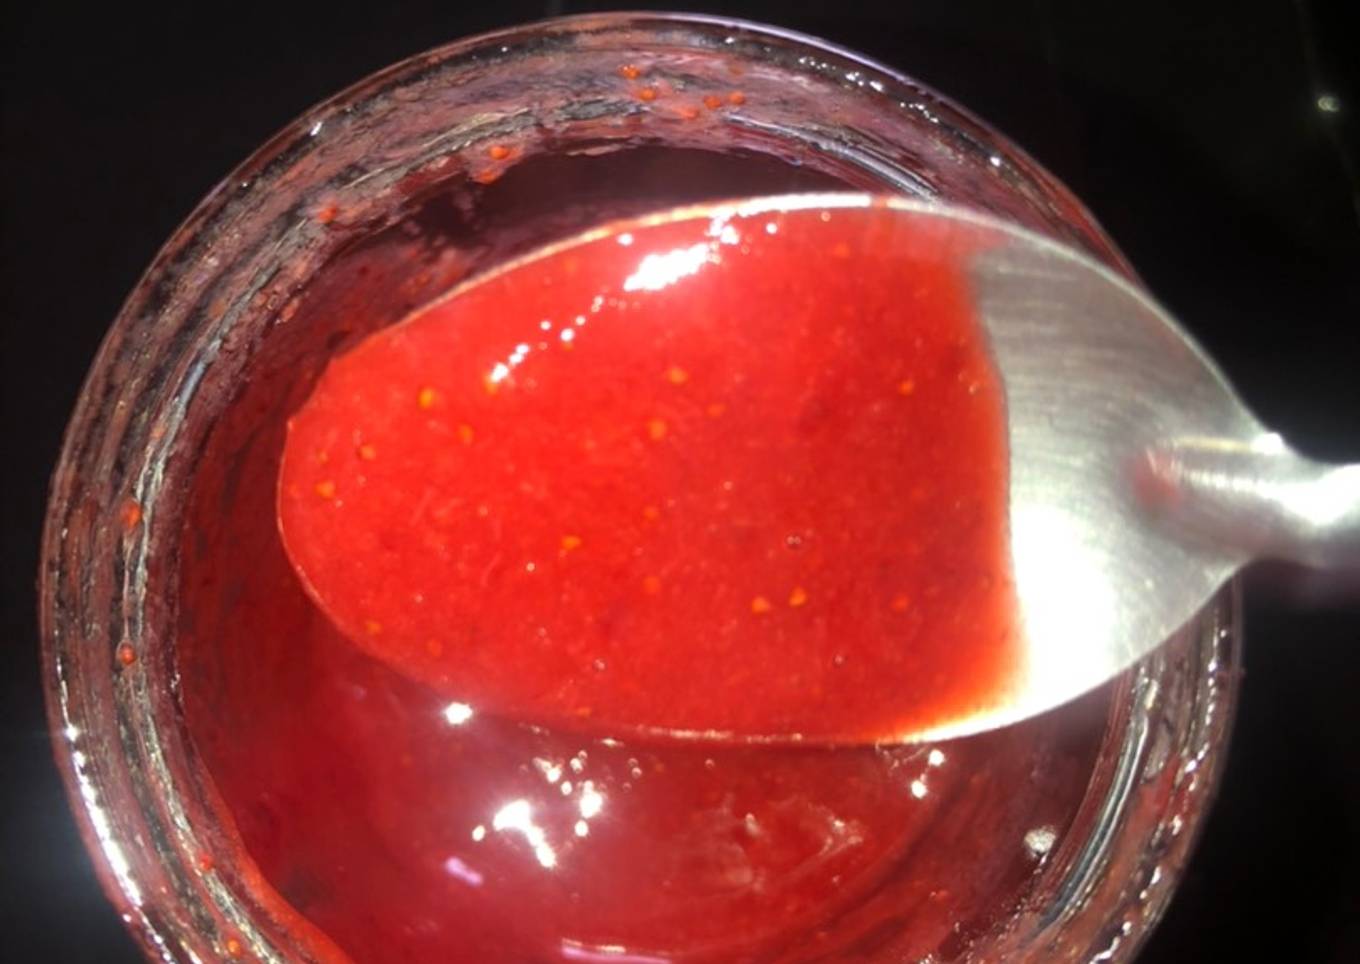 Strawberry Compote/Sauce